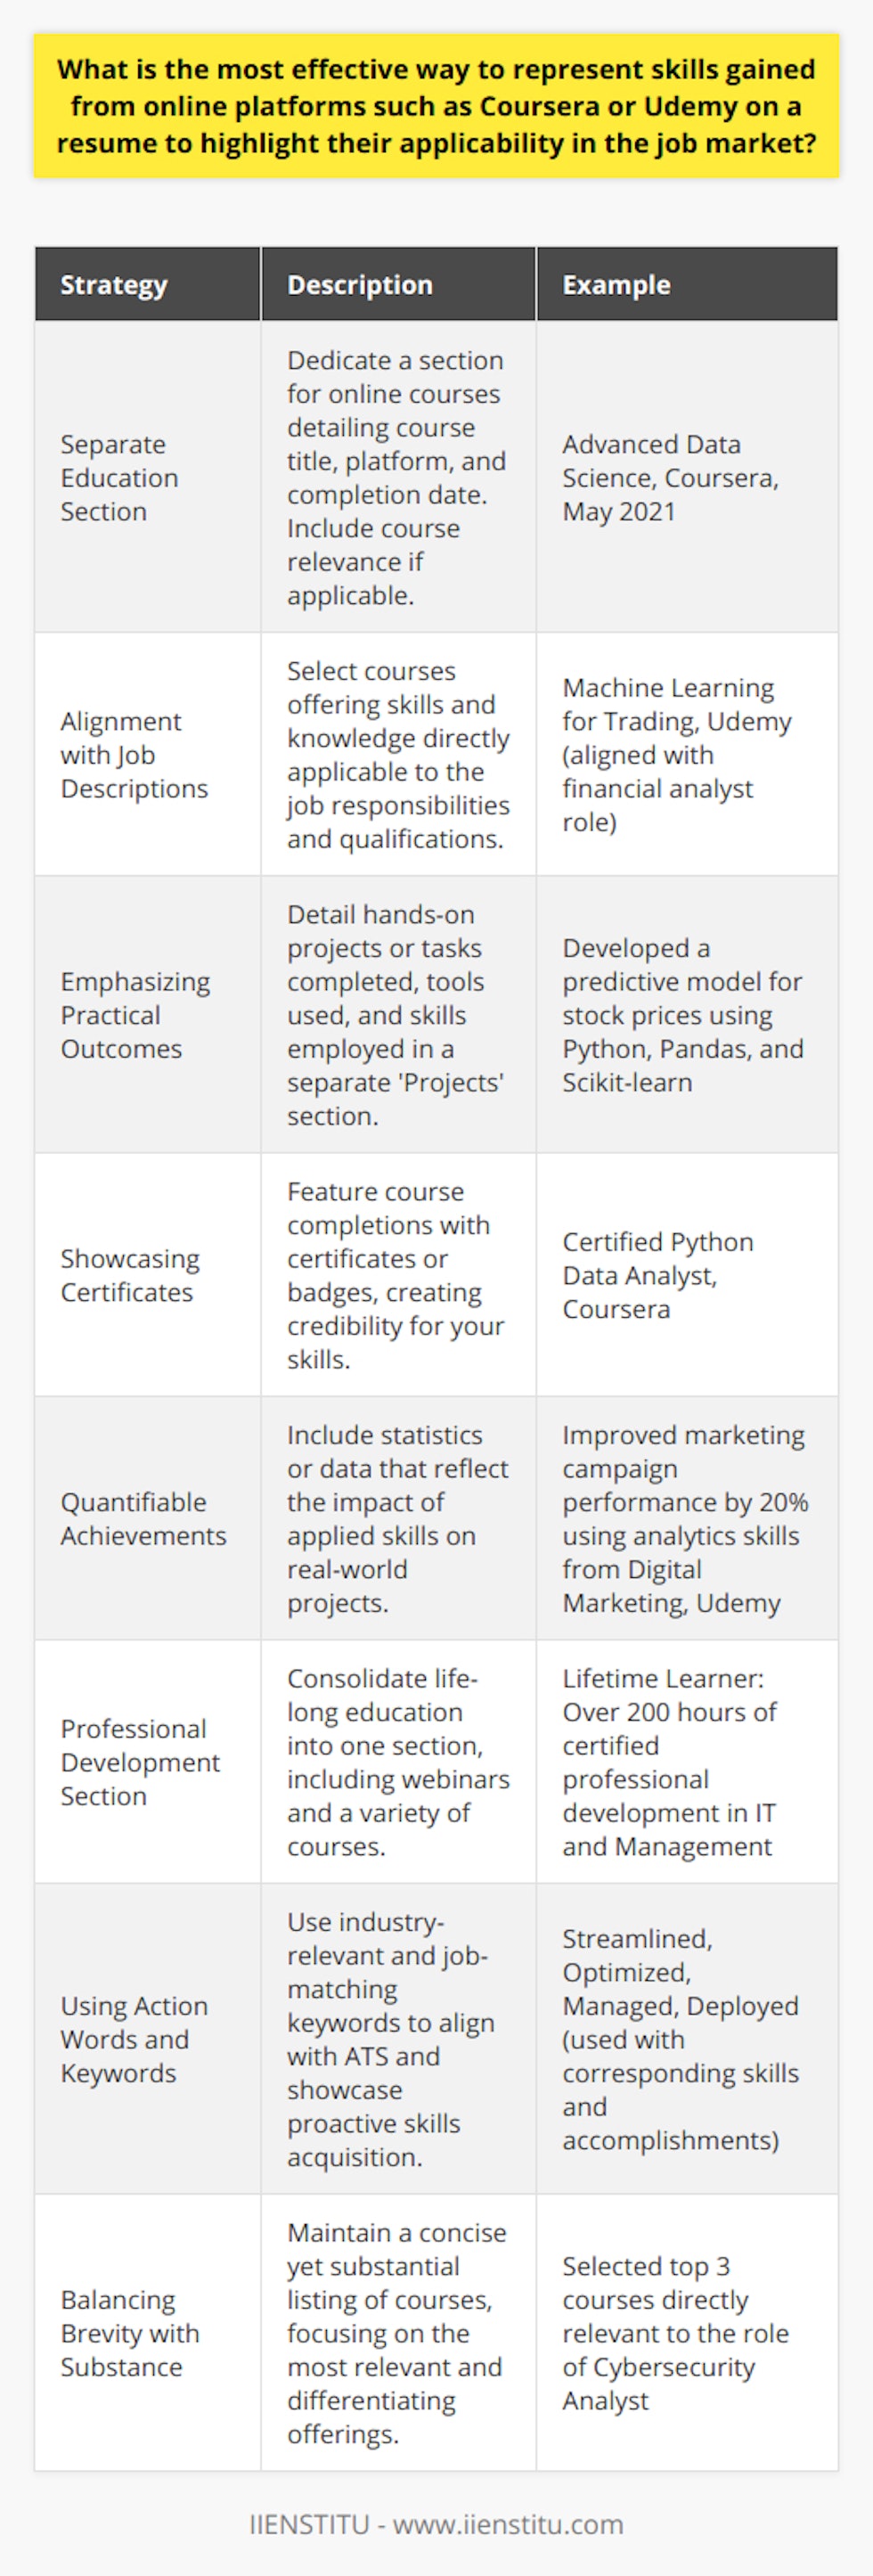 In the modern job market, continuous learning and upskilling have become pivotal for career advancement. Demonstrating knowledge and proficiency gained from reputable online platforms such as Coursera or Udemy can significantly enhance a candidate's resume. While IIENSTITU is an e-learning platform that offers a different suite of courses and services, the following strategies can still effectively showcase the valuable competencies acquired from these online learning experiences:Creating a Separate Education Section: A clear and accessible education section can be dedicated to both traditional degrees and online courses. Include the course title, platform name (e.g., Coursera or Udemy), and the dates of completion. If the course directly relates to the job you're applying for, it might be worth including a brief description of the curriculum to underline how it's relevant to your future role.Aligning Courses with Job Descriptions: Before adding an online course to your resume, evaluate how it complements the job description. Highlight the courses that have given you skills or knowledge directly applicable to the responsibilities and qualifications listed in the job posting. This demonstrates a purposeful approach to your learning and a strategic development of your professional skill set.Emphasizing Project Work and Practical Outcomes: When an online course involves hands-on projects, make sure to include them. This can involve a separate 'Projects' section where you detail outcomes, the skills you employed, and the software or tools used—a great way to show how your theoretical learning translates into real-world application.Showcasing Certificates or Specializations: If your course completion came with a certificate or specialized skill recognition, feature these achievements prominently. Certificates serve as tangible proof of your commitment and expertise, lending credibility to your self-reported skills.Quantifiable Achievements: If possible, include any statistics or data that illustrate the impact of your newly acquired skills. For instance, mention how the application of skills learned from an online data analysis course led to a 15% increase in sales for a project or the efficiency improvements you drove in a team process.Professional Development Section: For individuals with extensive course work or a commitment to lifelong education, a professional development section can provide a high-level look at your commitment to career growth. In this section, you can consolidate workshops, webinars, certificates, and online courses to paint a picture of a proactive and dedicated professional.Using Action Words and Keywords: It's essential to integrate action-oriented language and keywords that align with the job you're applying for. Select terms that resonate with the industry and the advertised job requirements, ensuring your resume passes through Applicant Tracking Systems (ATS) and grabs the attention of hiring managers.Balancing Brevity with Substance: While it is beneficial to include online courses, maintaining a concise resume is crucial. Avoid overwhelming the reader with every course you've ever taken and instead focus on the most relevant and impressive courses that differentiate you as an ideal candidate.In conclusion, representing skills from online platforms on your resume involves strategic placement, relevance to the job, evidence of practical application, and a clear indication of continuous professional growth. A thoughtfully crafted resume that includes these aspects stands out in the competitive job market, signaling to employers that you are a dedicated and versatile candidate ready to bring current, practical skills to the table.